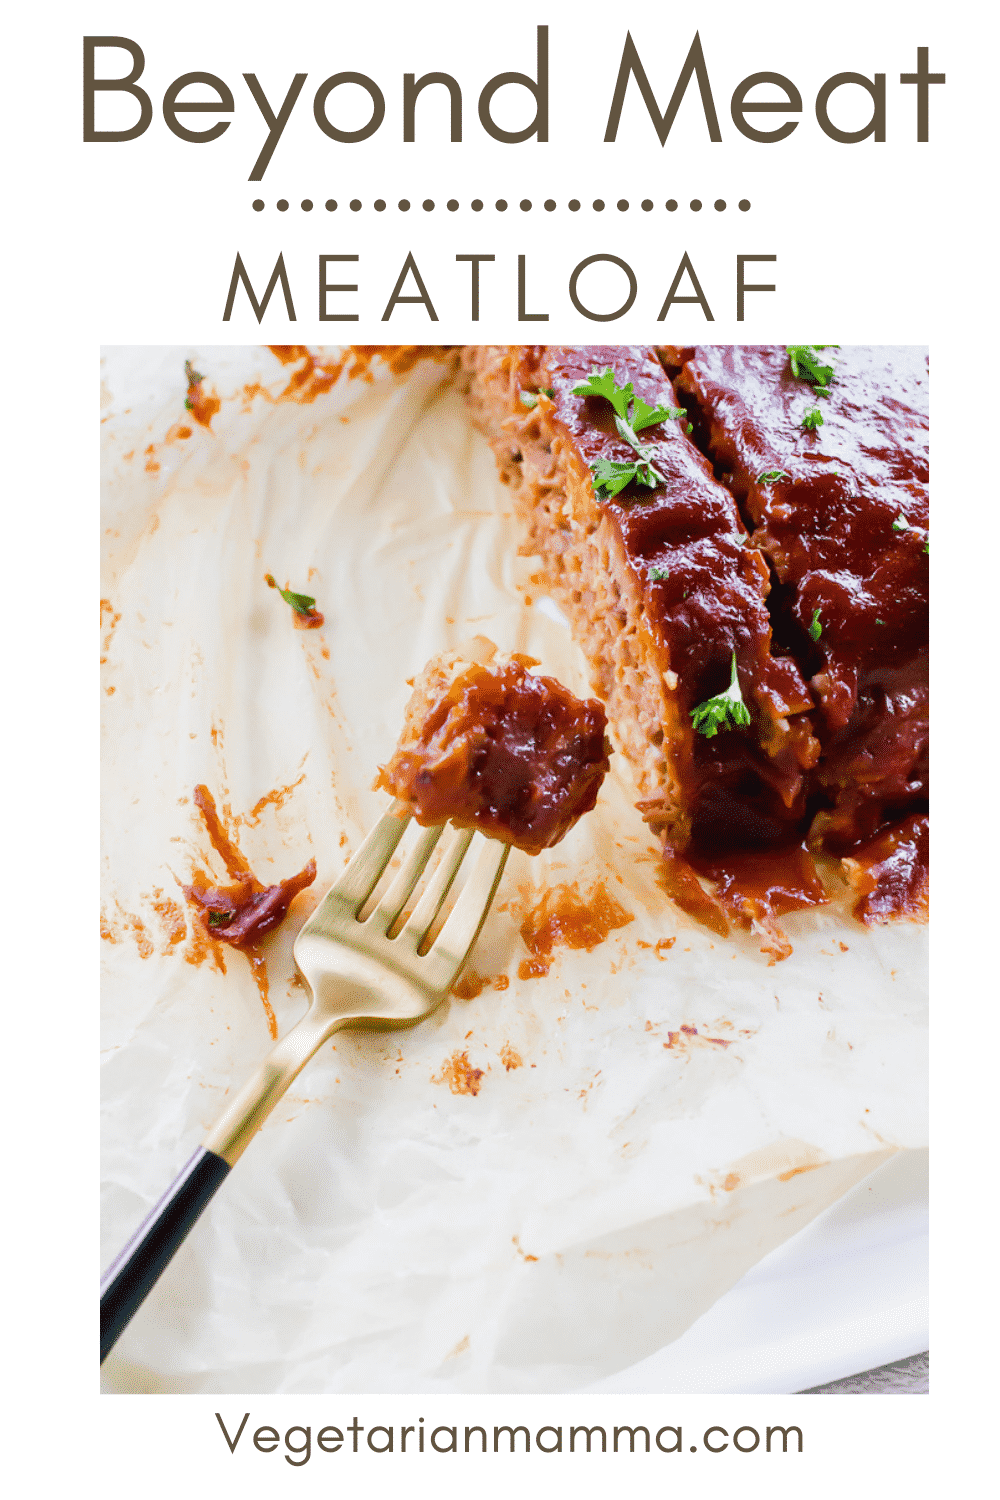 Beyond Meat meatloaf is the vegan comfort food of your dreams! Enjoy all the flavors of a traditional meatloaf with a plant-based protein swap instead of meat. #beyondmeat #beyondmeatmeatloaf #vegetarianmeatloaf